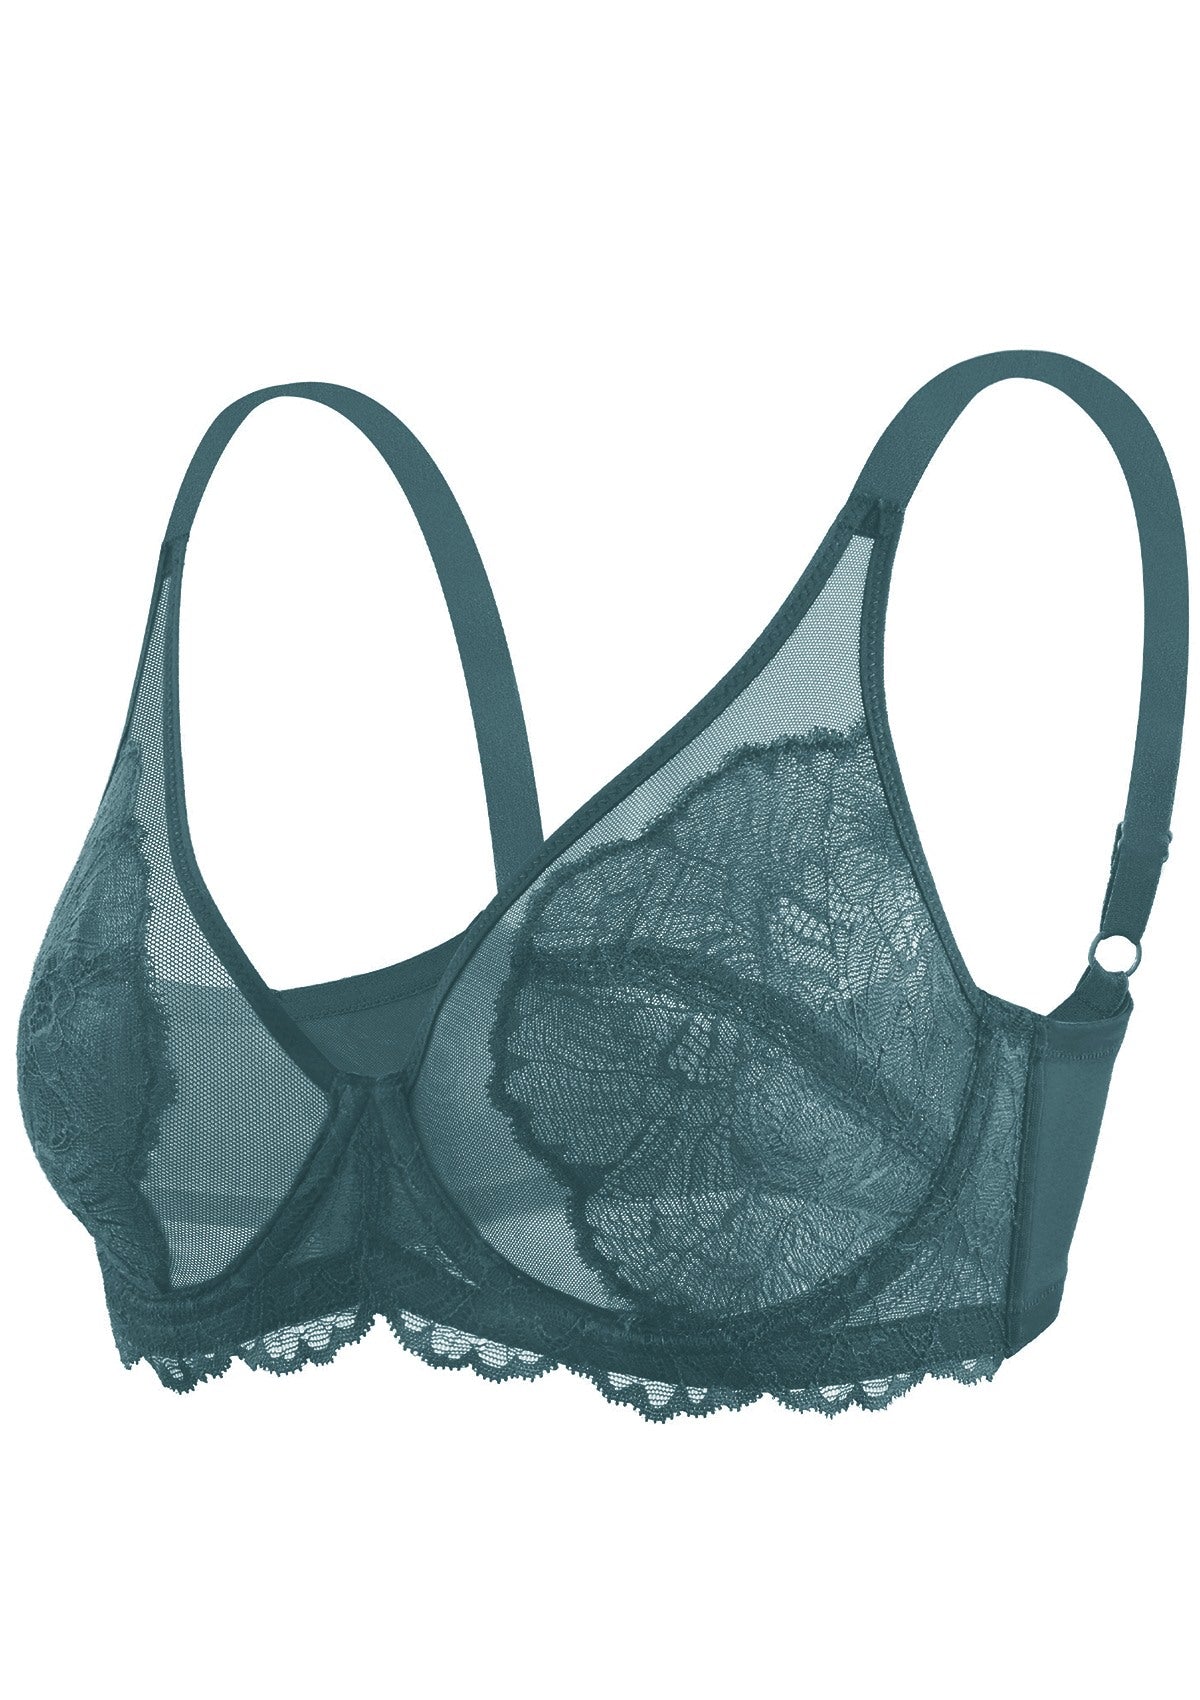 HSIA Blossom Full Figure See-Through Lace Bra For Side And Back Fat - Dark Blue / 36 / DD/E